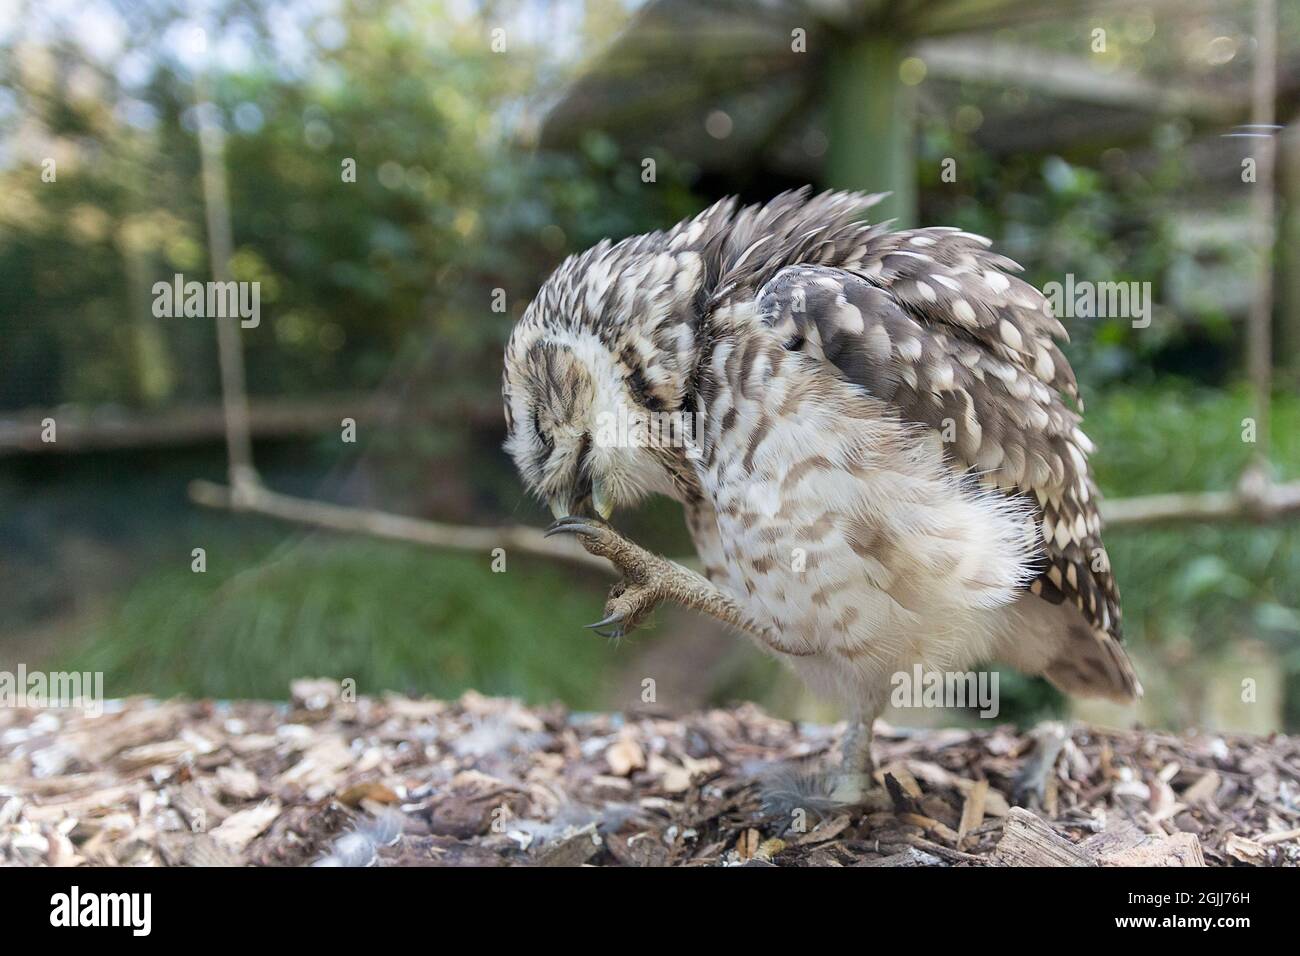 Little owl (Athene noctua) behind glass in captivity small with dappled grey brown and white plumage yellow eyes and hooked bill white eye brows Stock Photo